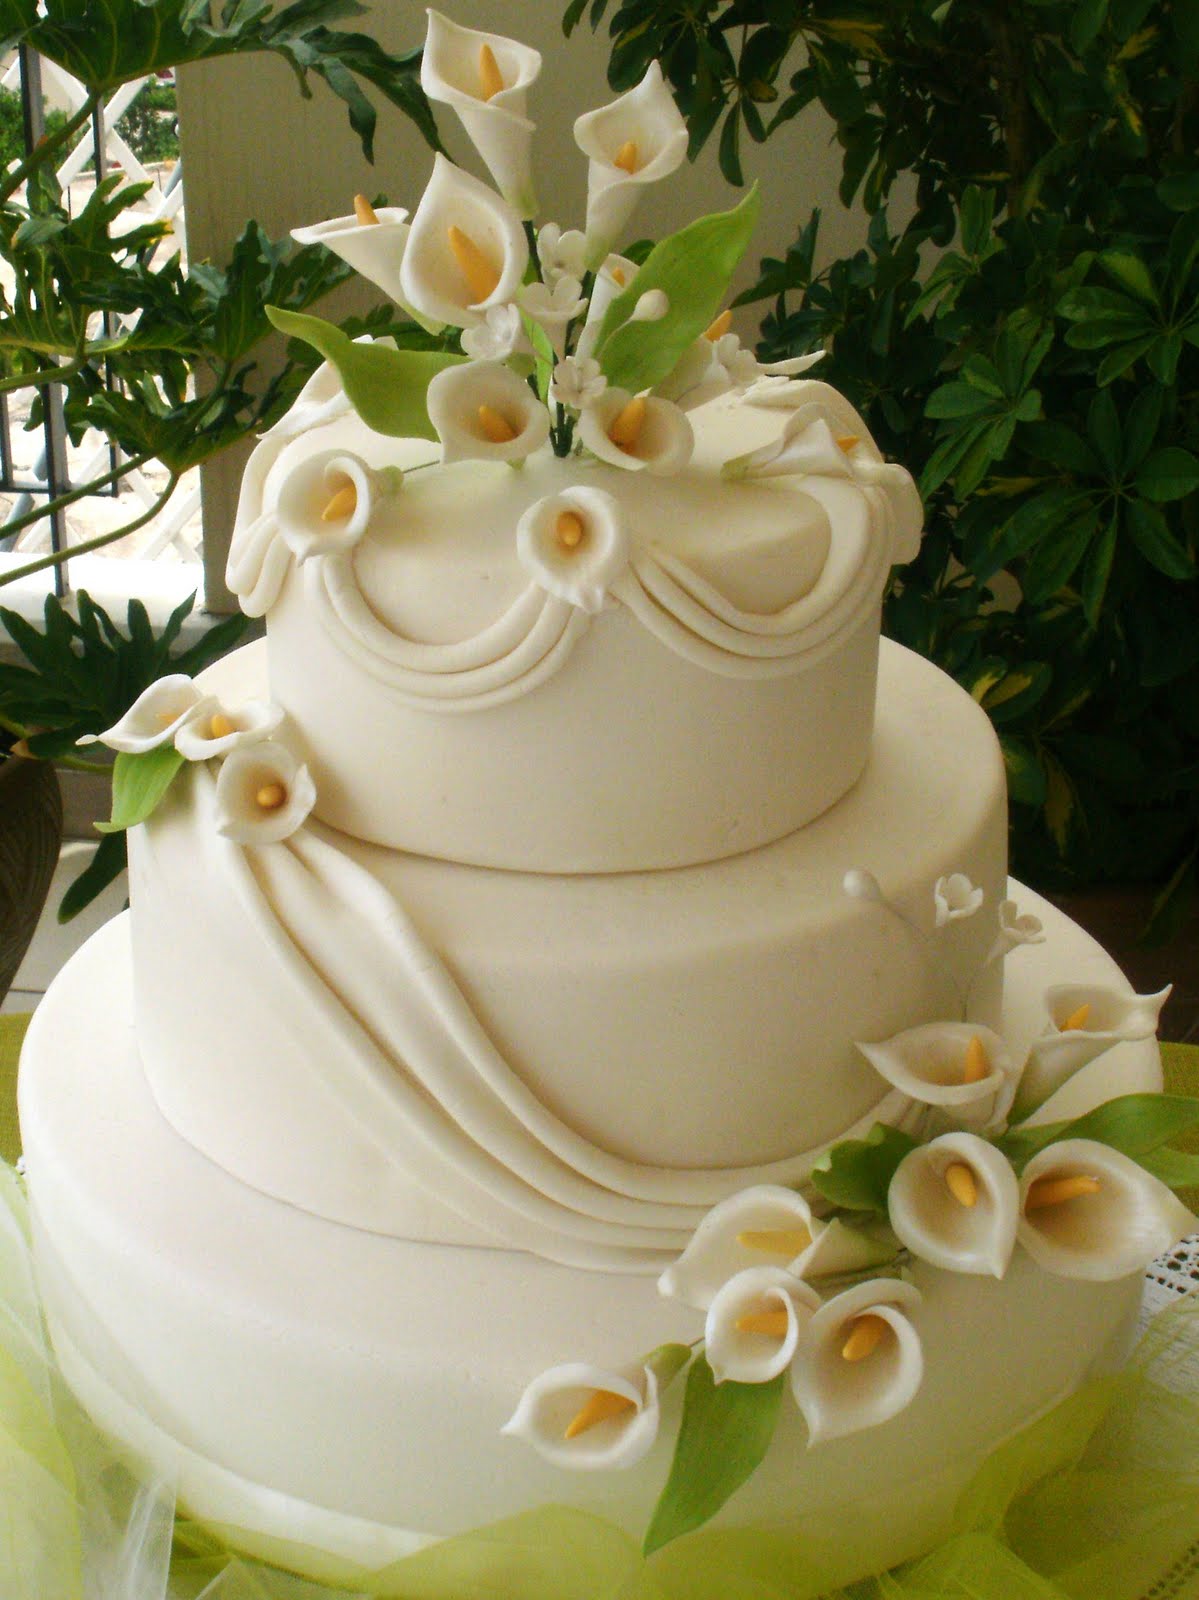 Wedding Cakes with Calla Lilies Decorations